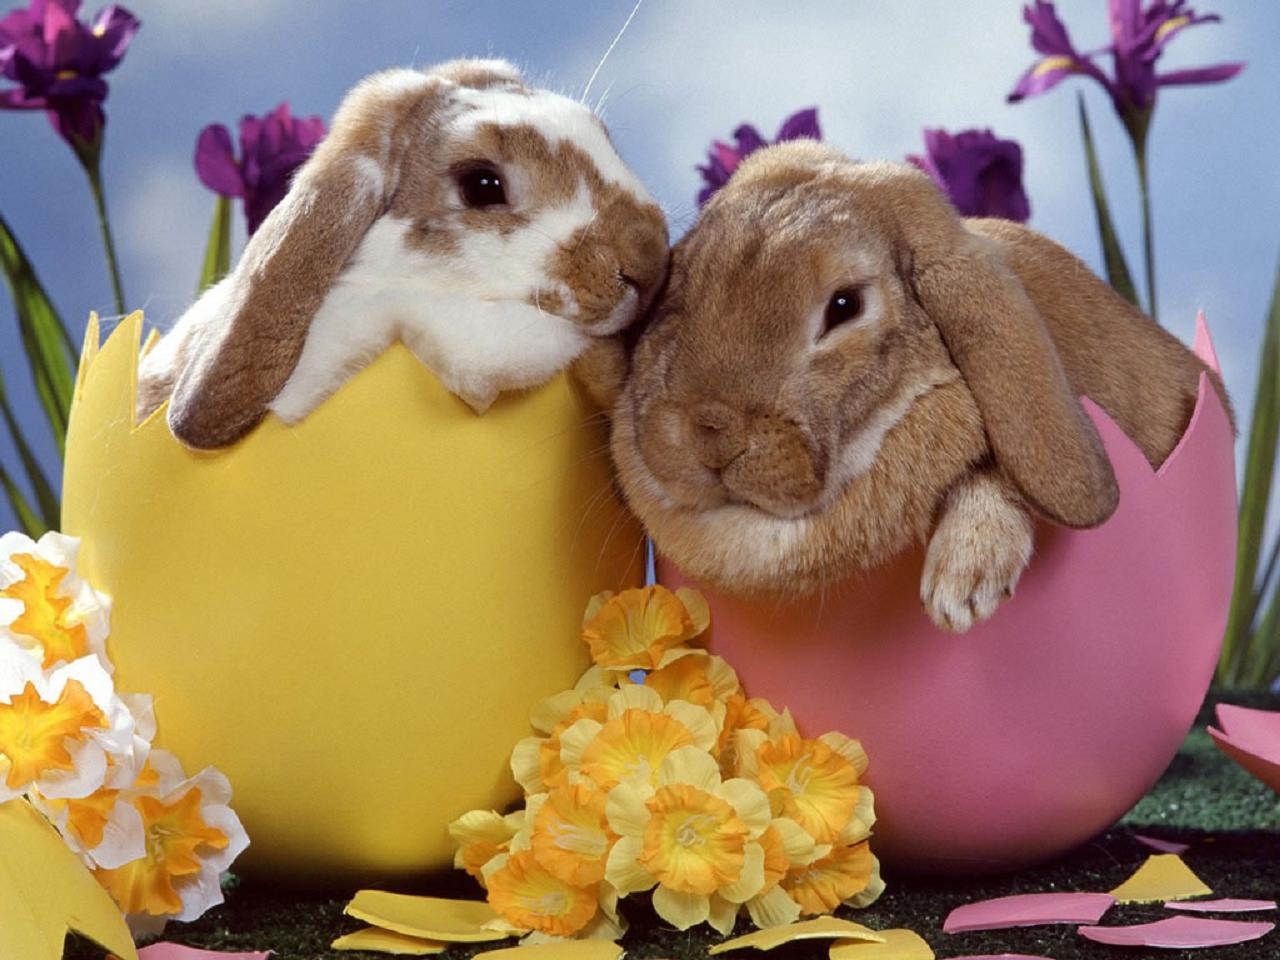 Easter Bunny Wallpaper - High Definition, High Resolution HD Wallpapers :  High Definition, High Resolution HD Wallpapers